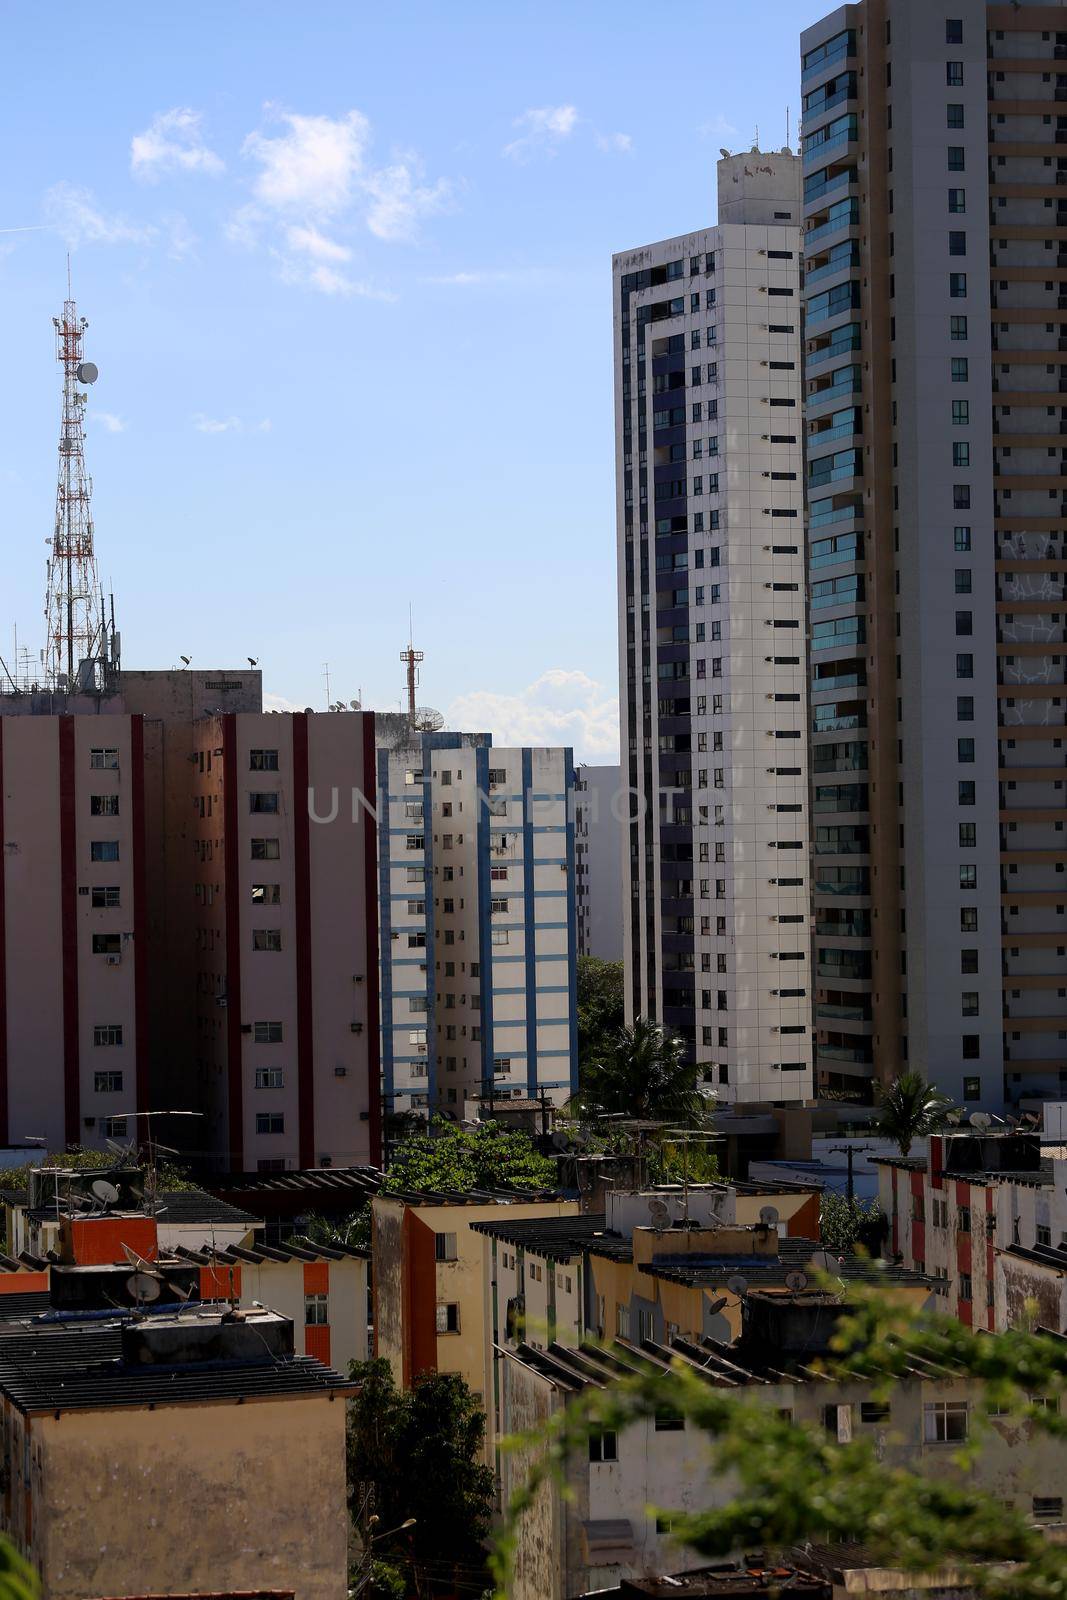 salvador, bahia, brazil - august 9, 2018: view of residential buildings in condominiums in the neighborhood of Imbui in the city of Salvador.